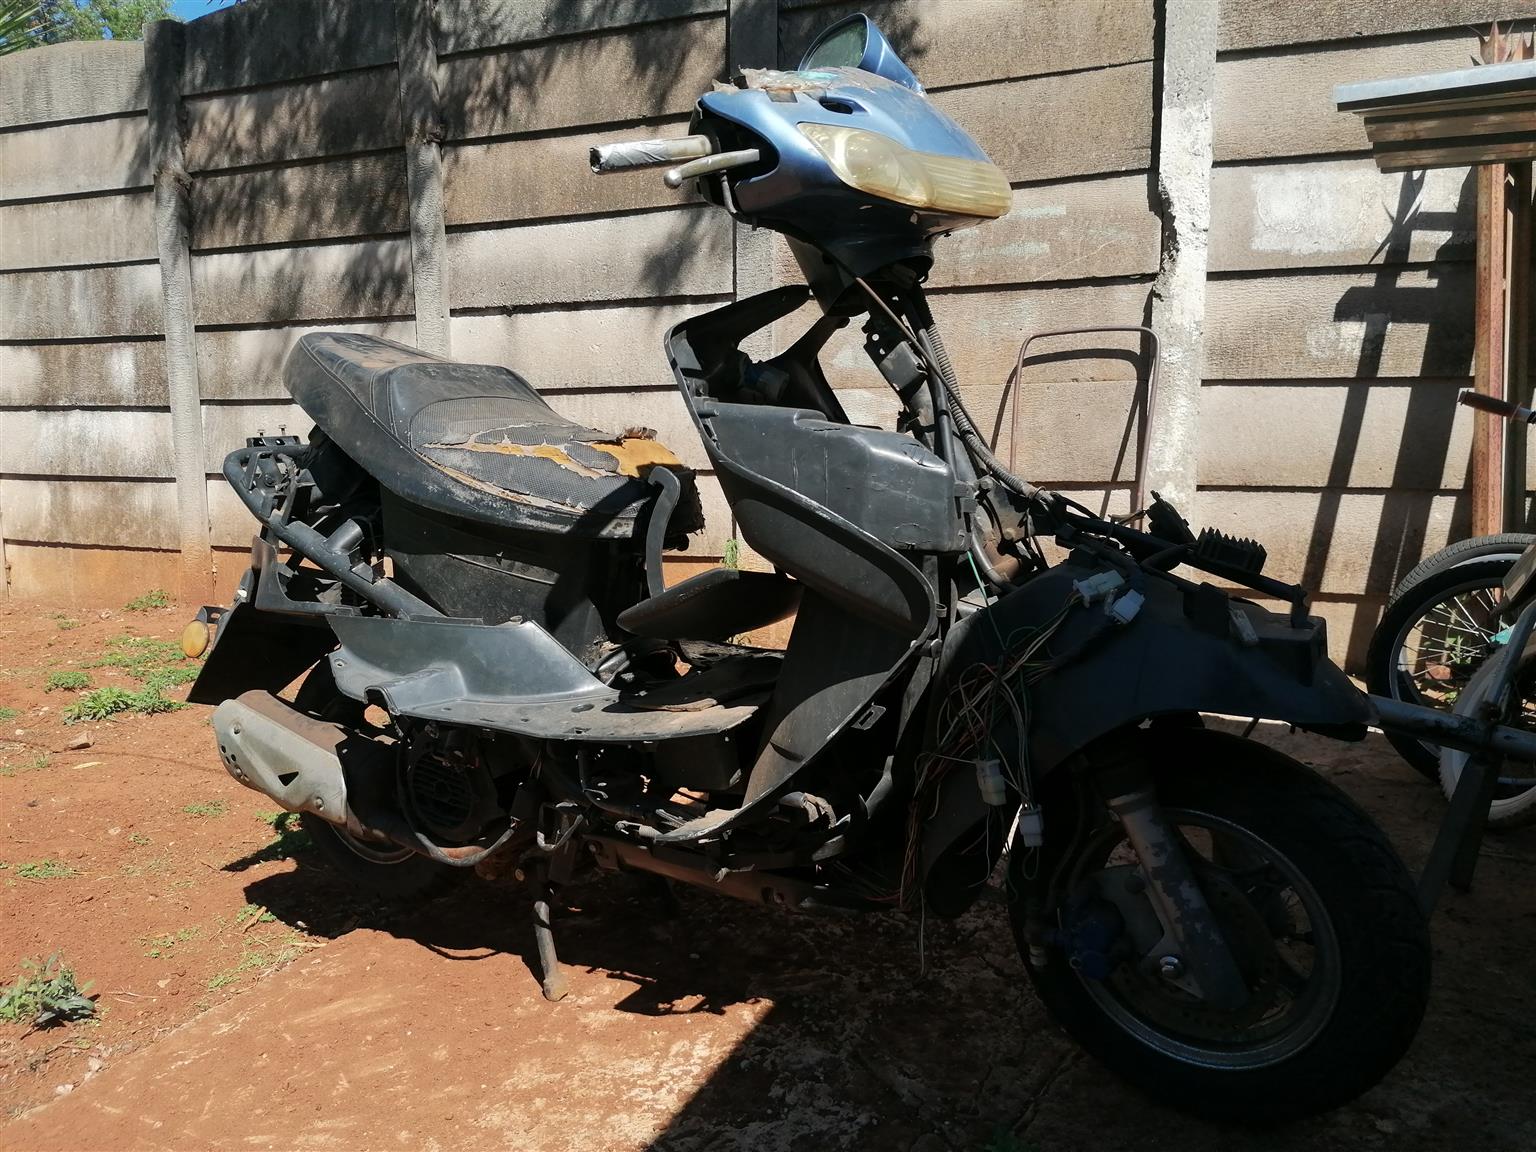 150cc vuka scooter for sparts only. Can be striped and parts sold seperate